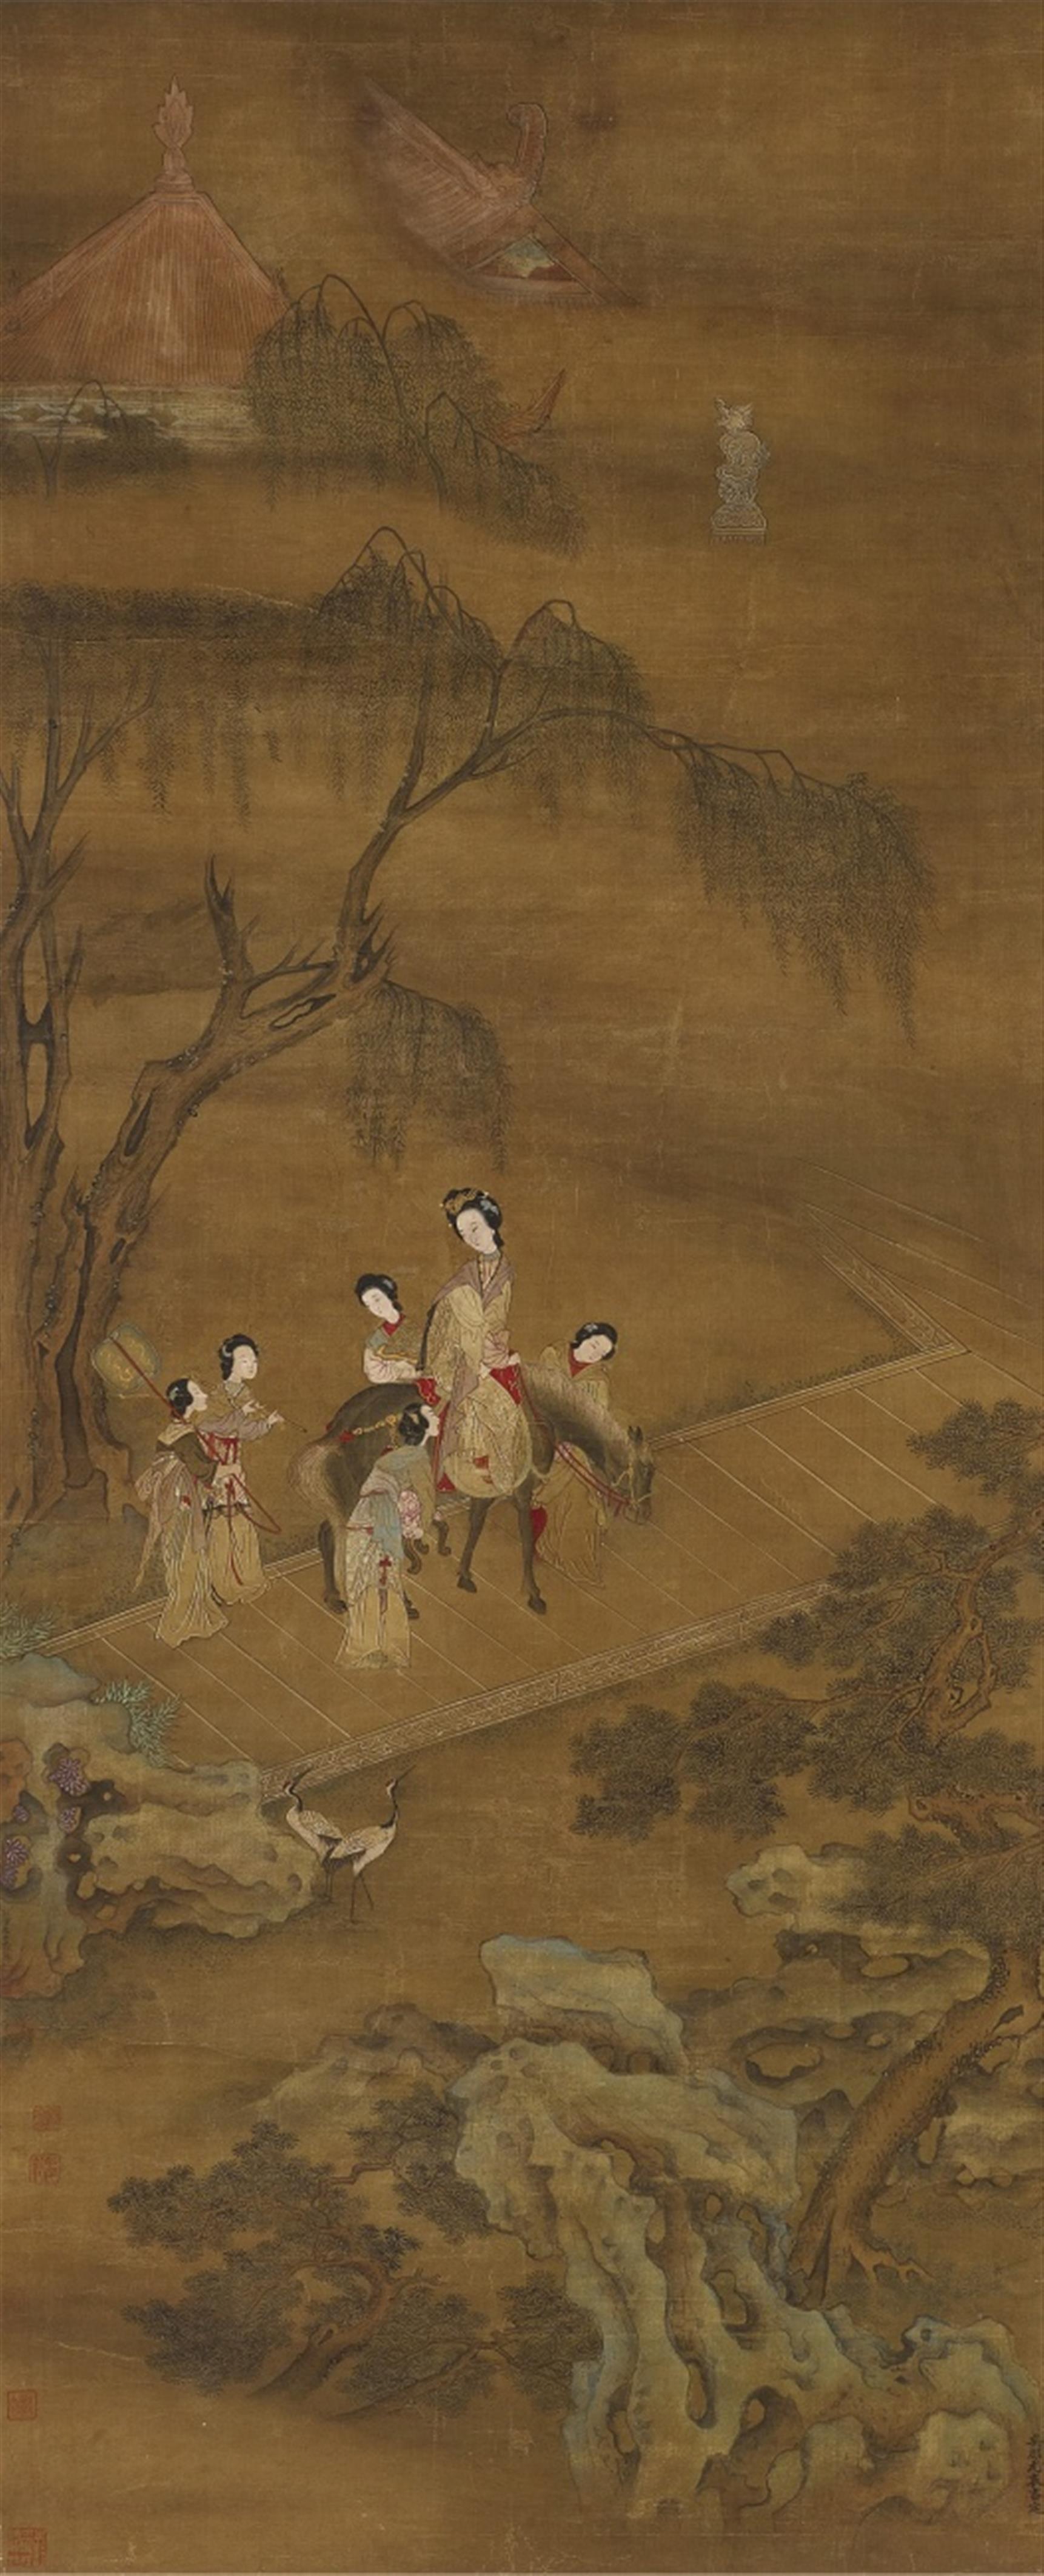 Wang Zhen . Qing dynasty
You Qiu and - Palace lady with five female attendants. Hanging scroll. Ink and colour on silk. Inscription, signed Wang Zhen (?), five seals. Inscription at the lower right Wu Junyou biao she... - image-1